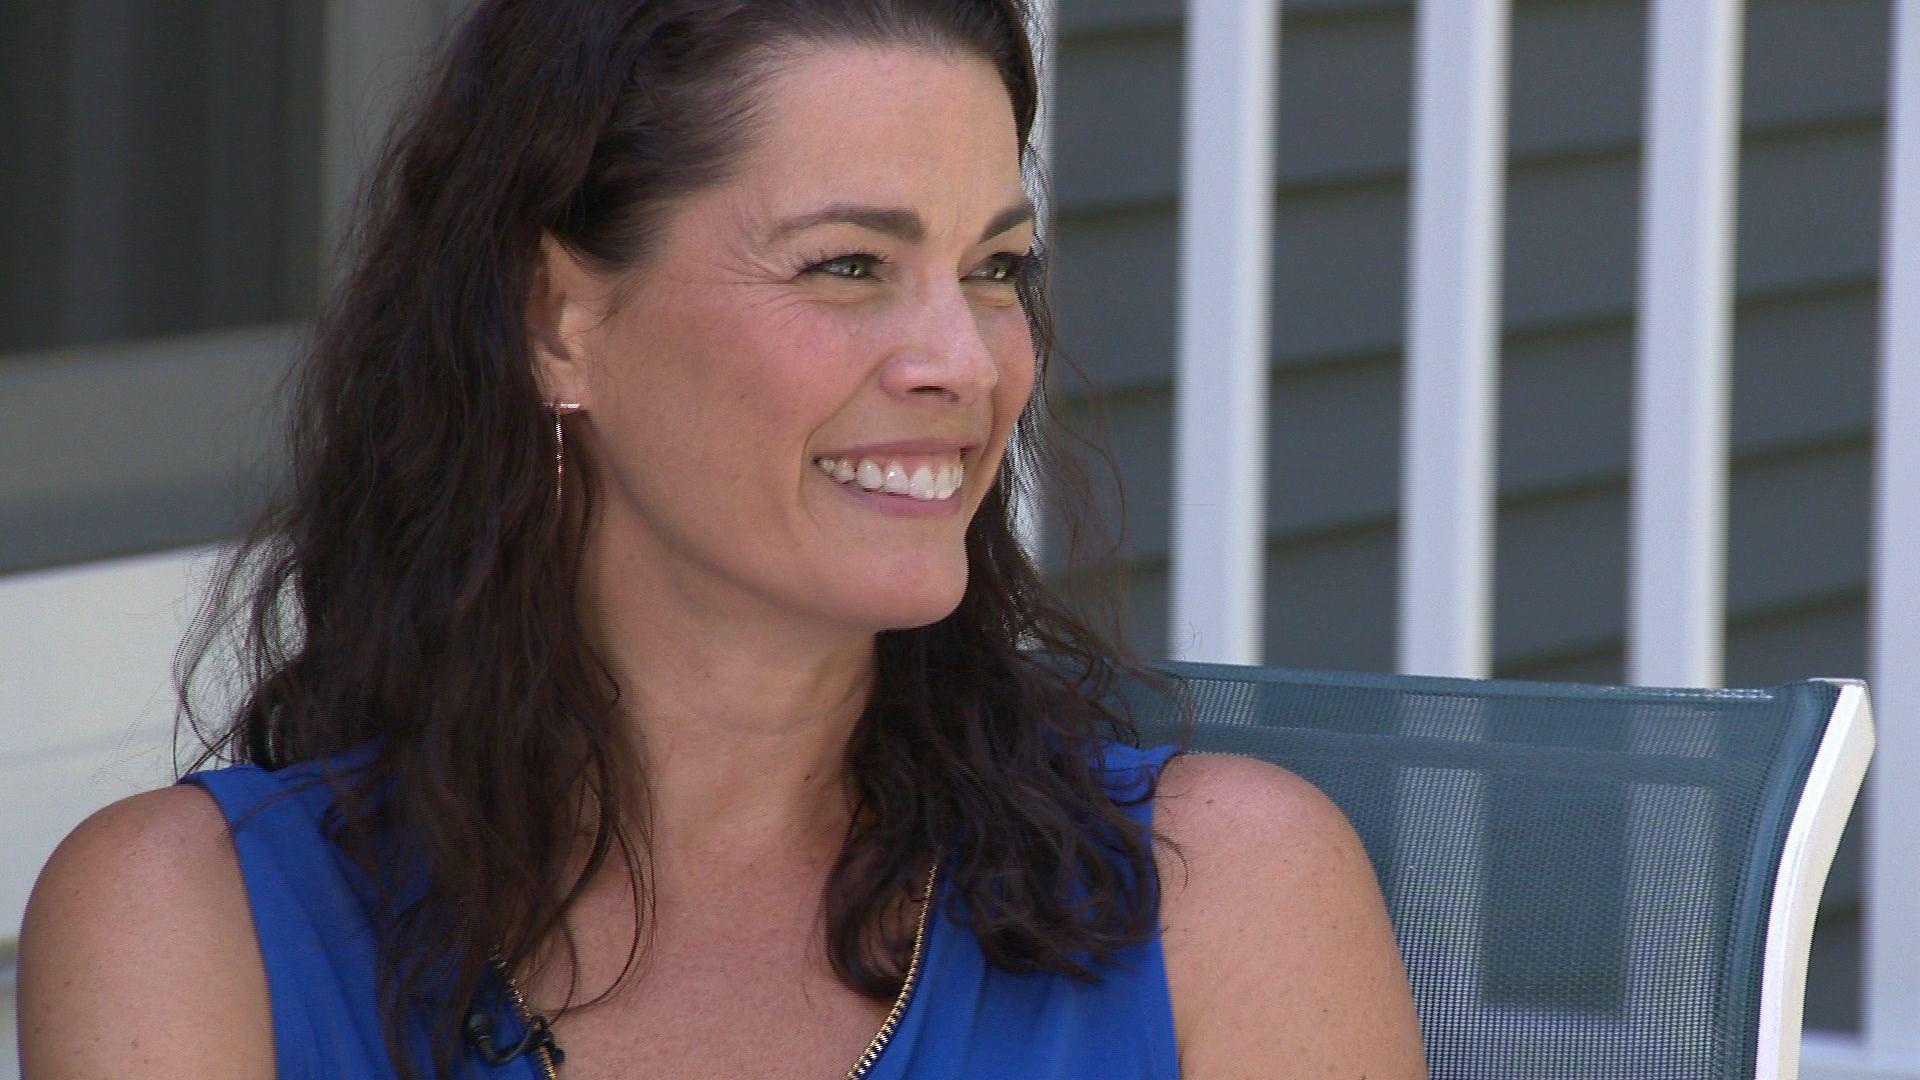 Nancy Kerrigan talks about opening up on 'Dancing with the Stars